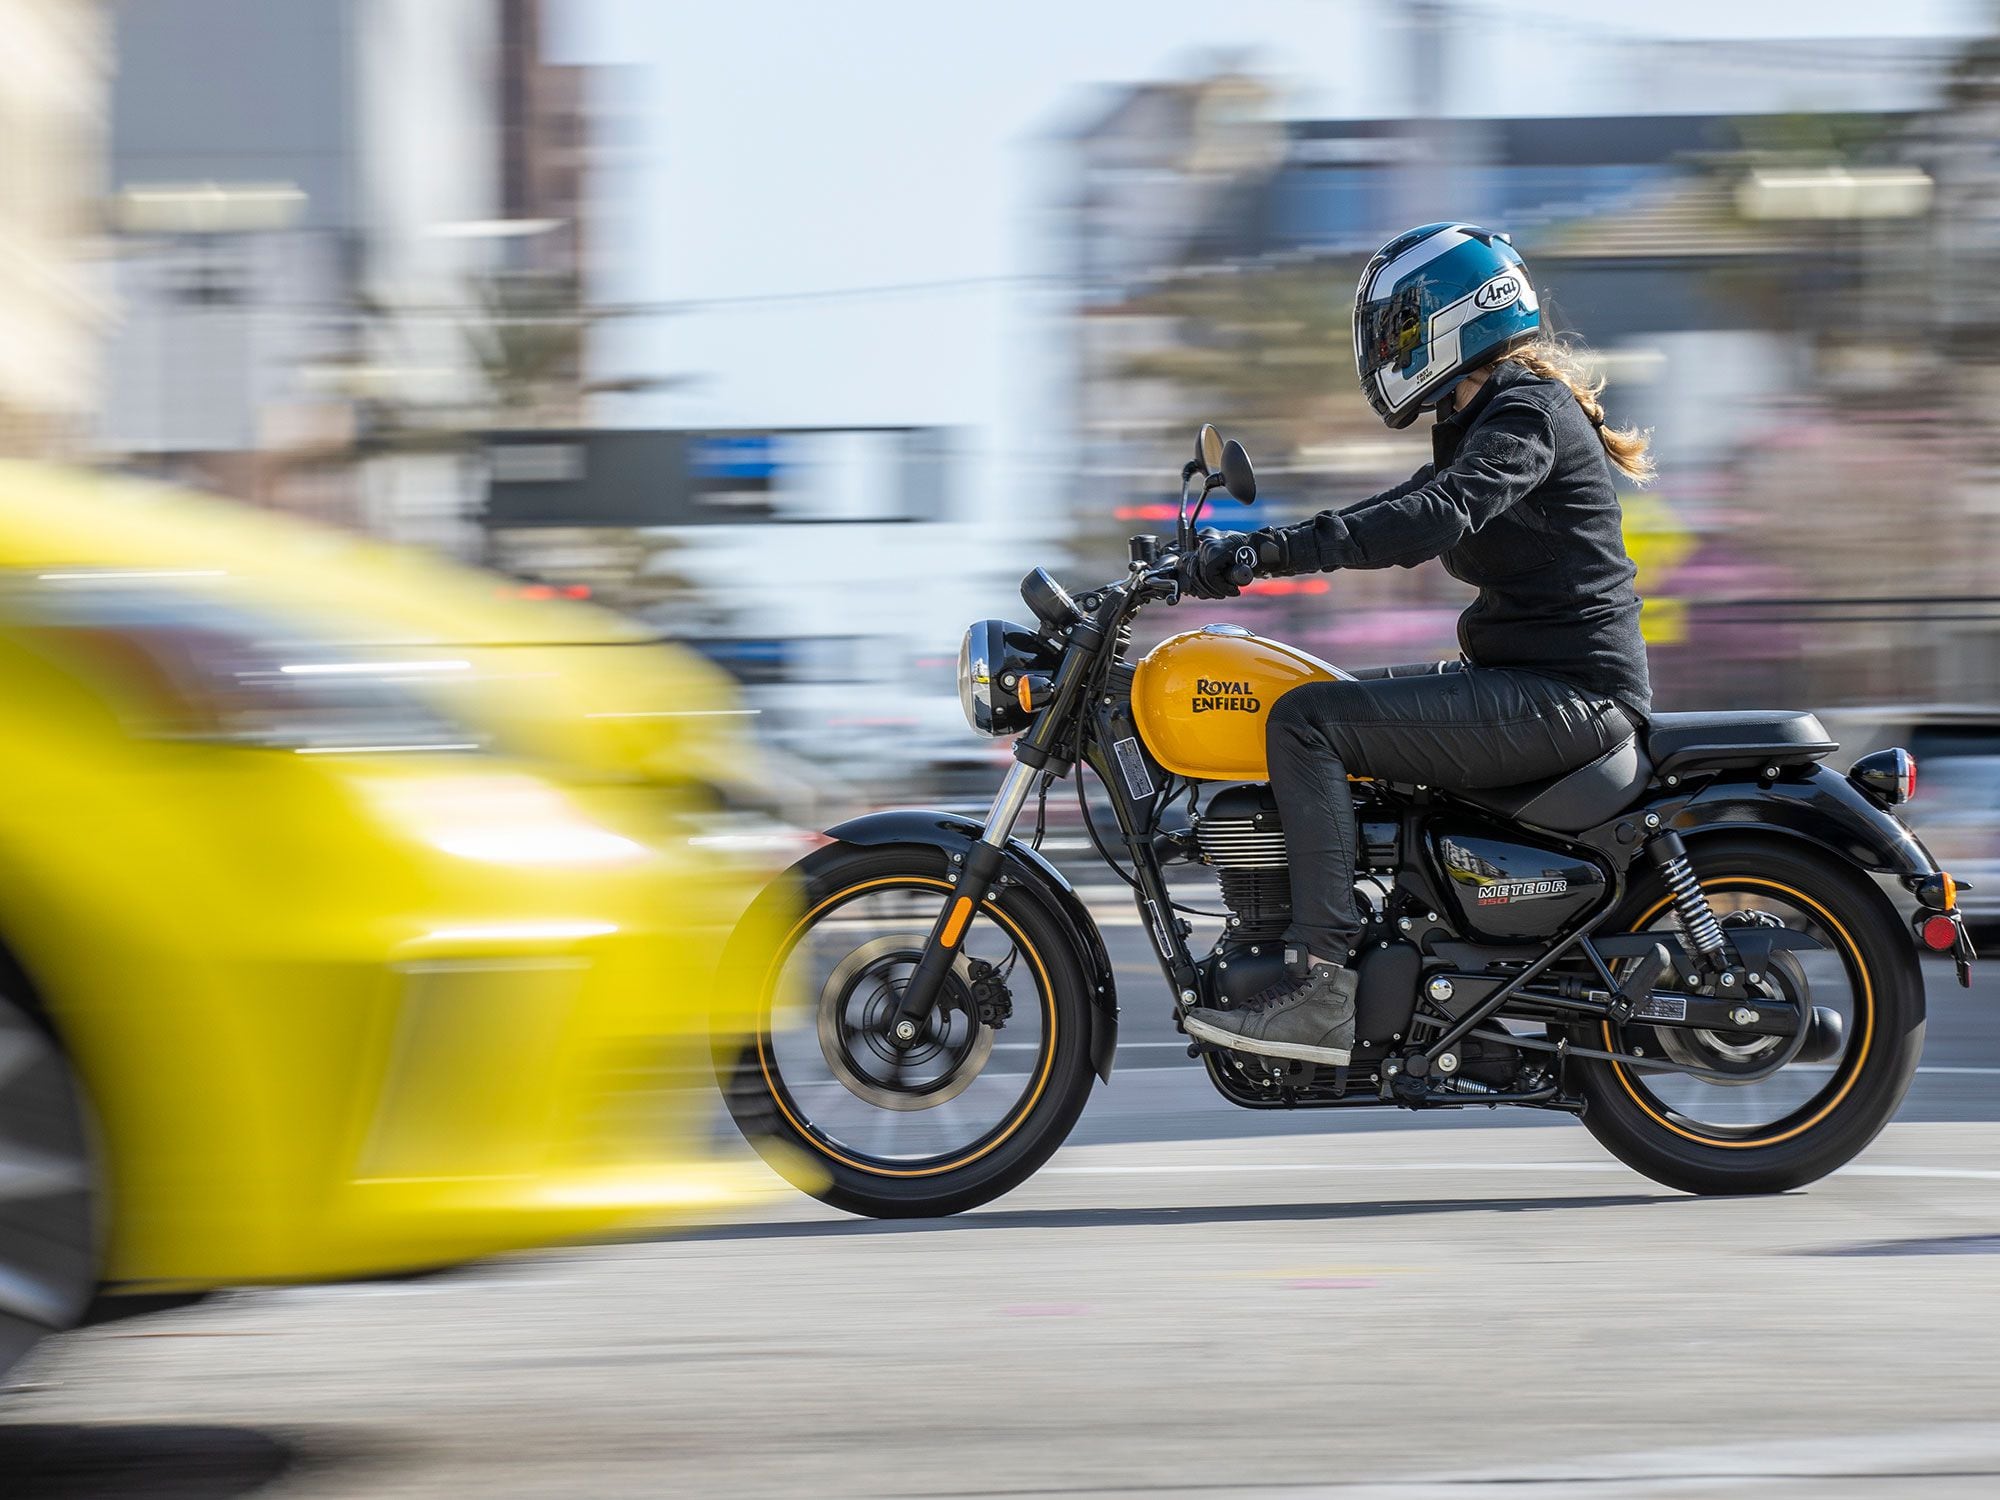 Mellow in Fireball Yellow. A ride down the boulevard is not a race, the Meteor invites the rider to relax and enjoy the ride.